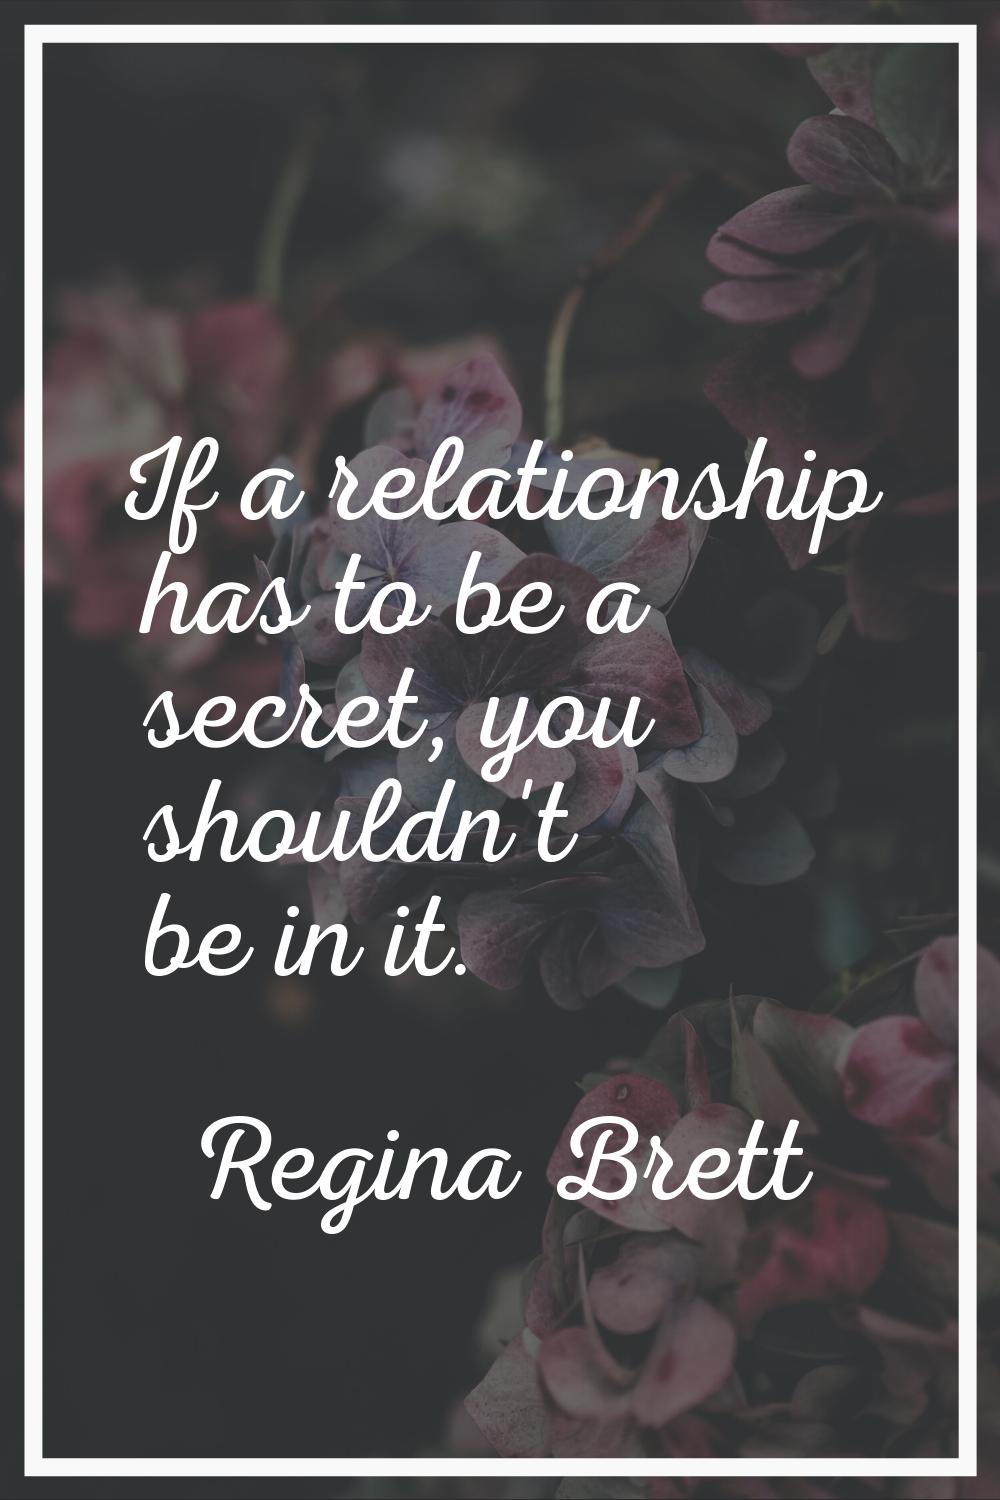 If a relationship has to be a secret, you shouldn't be in it.